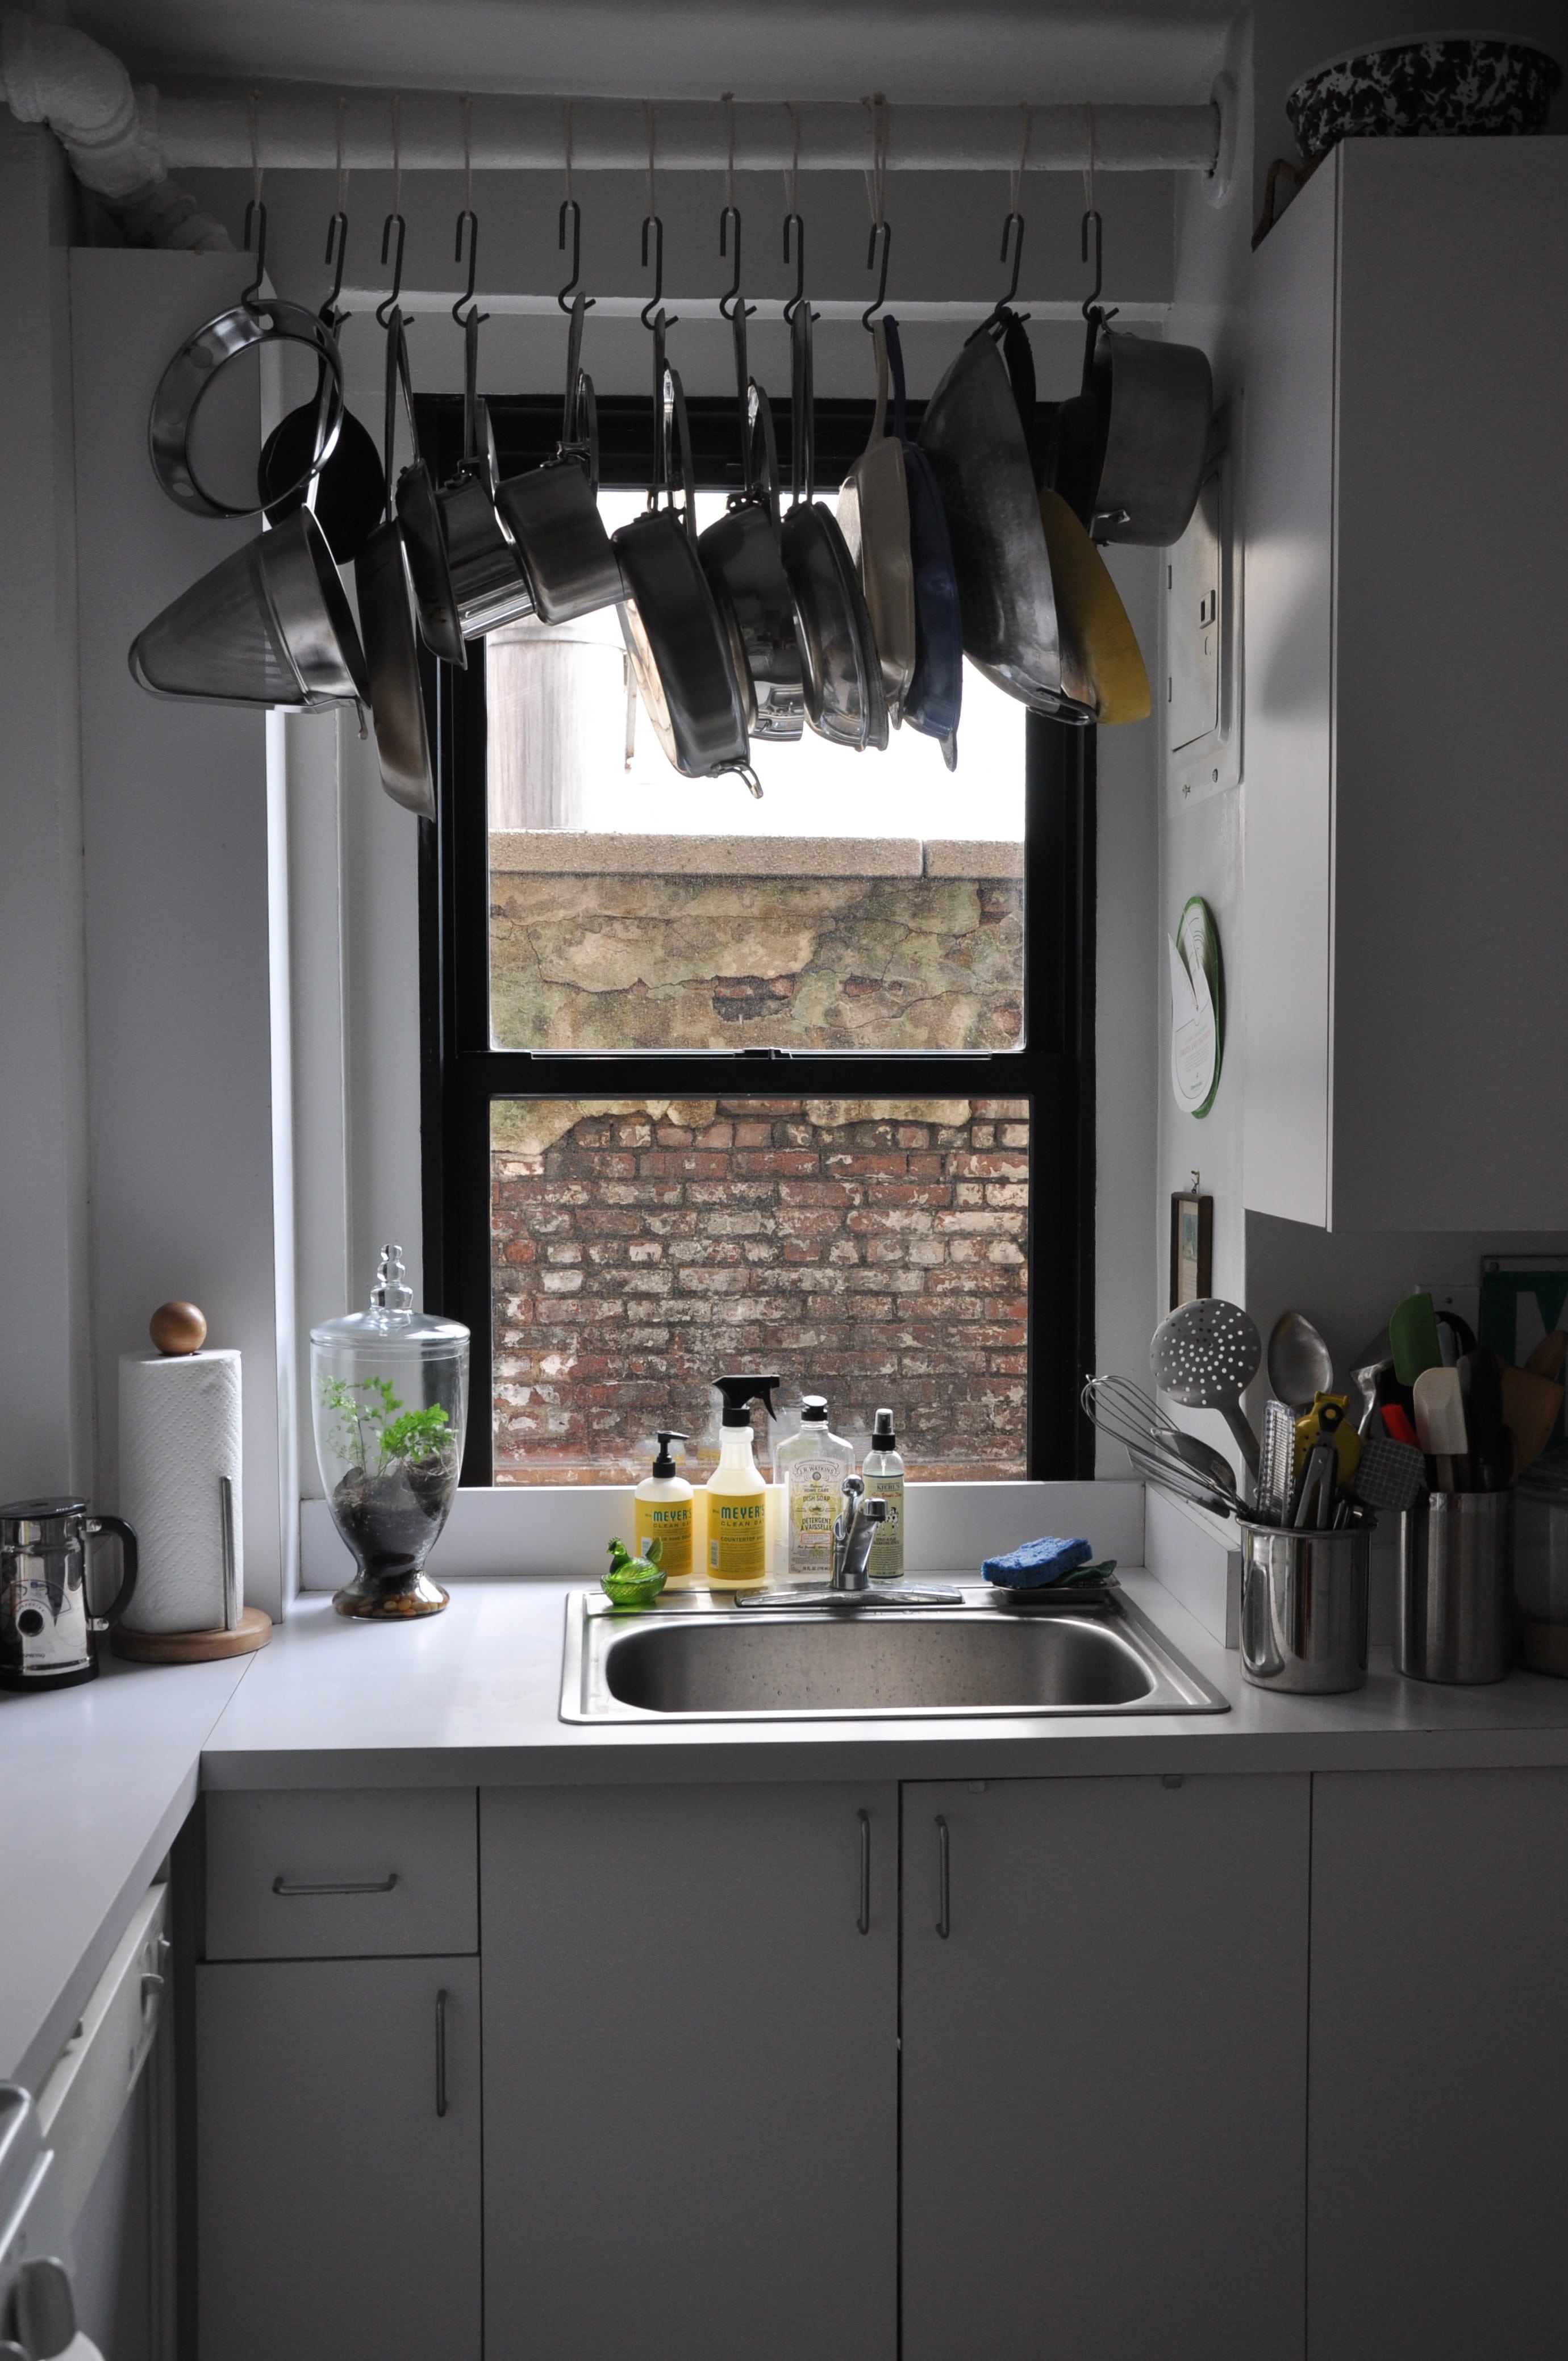 Hanging-pots-and-pans-creates-more-storage-space